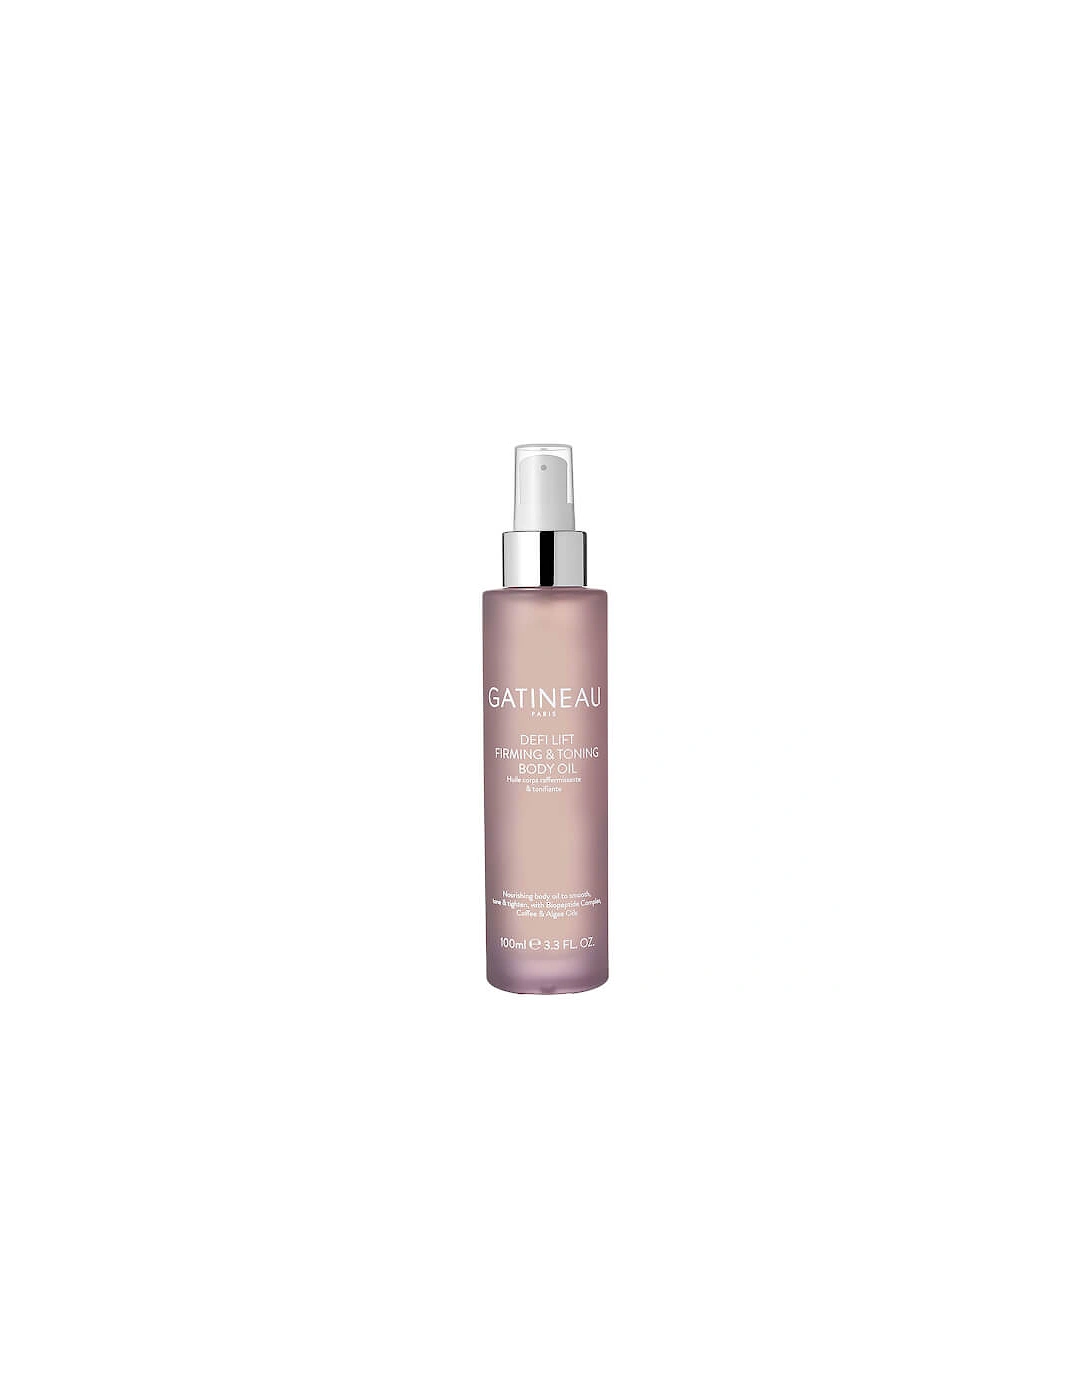 DefiLift Firming and Toning Body Oil 100ml, 2 of 1